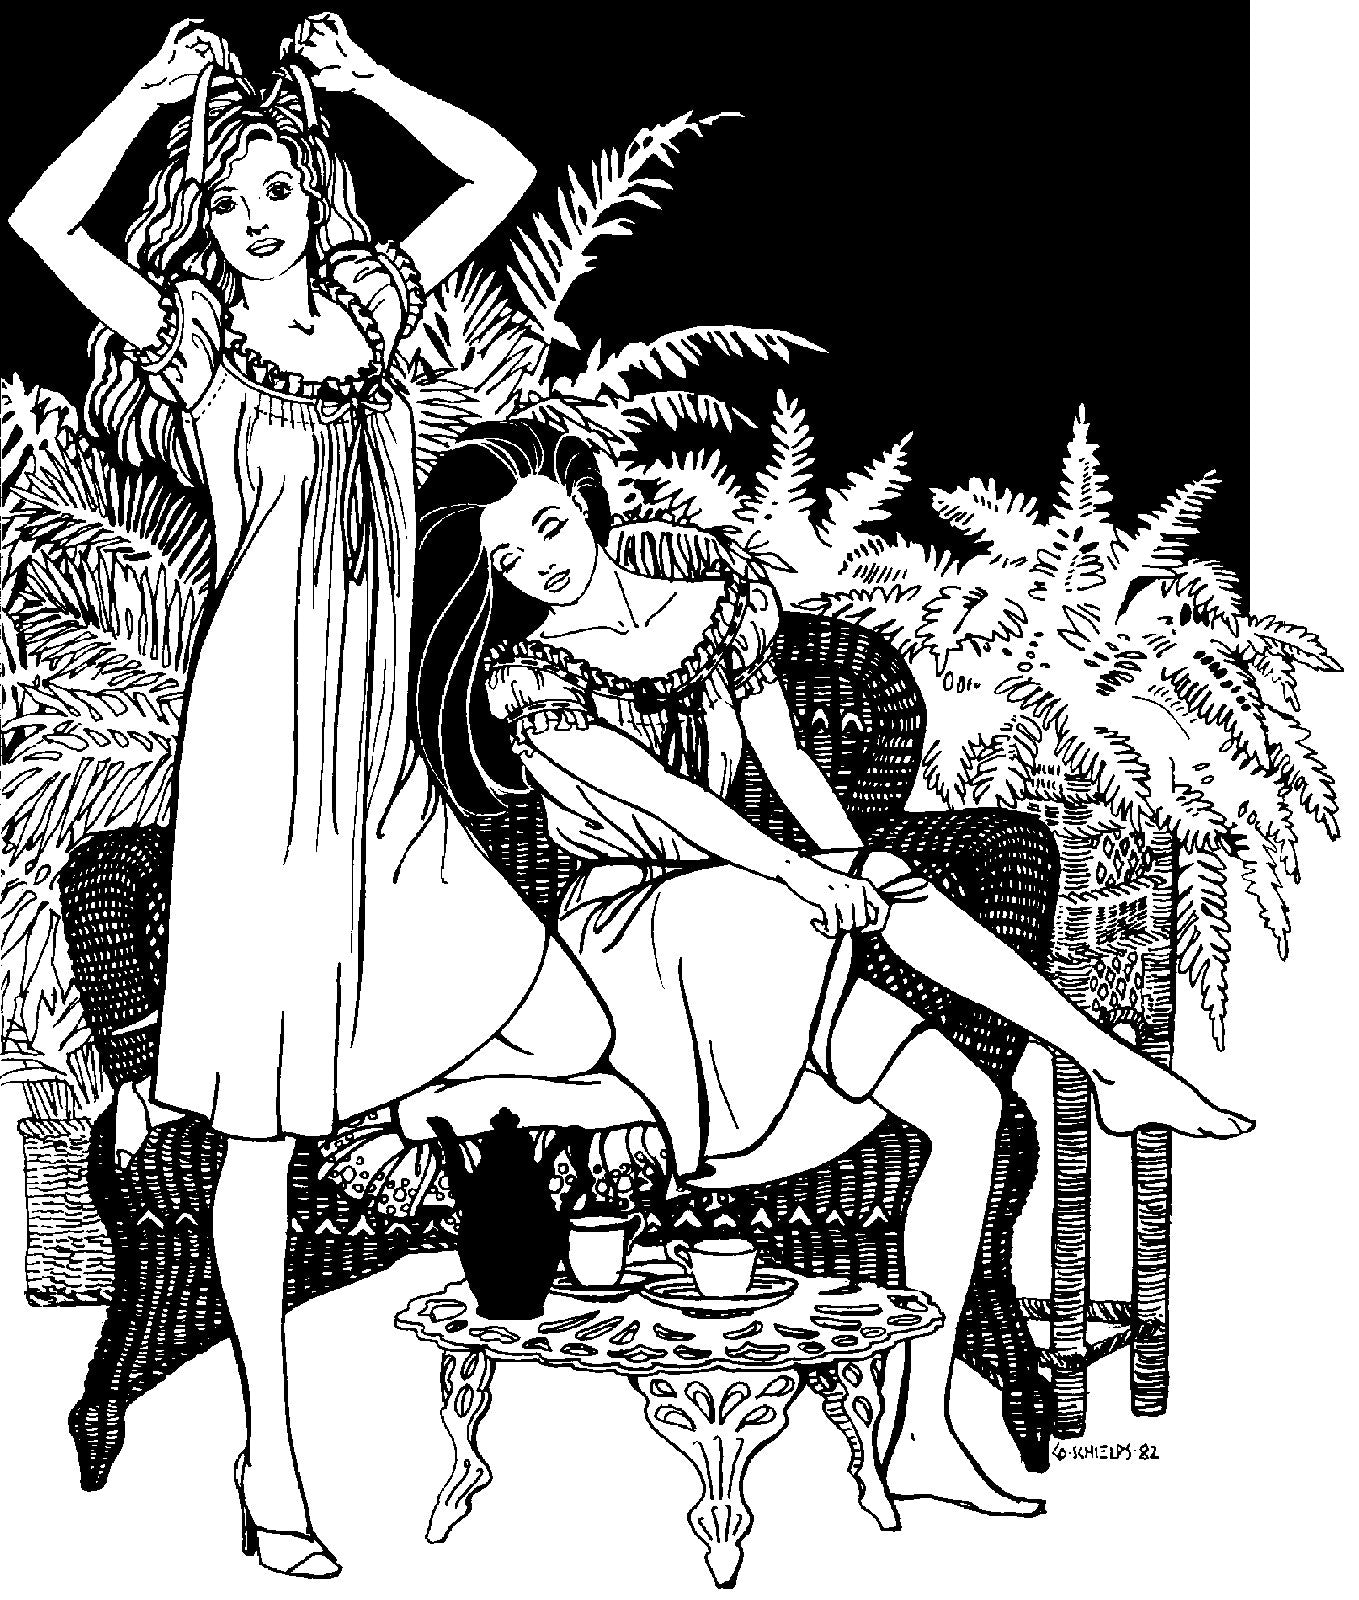 Black and white pen and ink drawing by Gretchen Shields. Two women, one standing on the left tying a ribbon in her hair, and the other on the right sitting on a woven lounge chair pulling up her socks, in front of a bush ferns, with a coffee table in front with tea set. Both women wearing 223 A Lady's Chemise. 